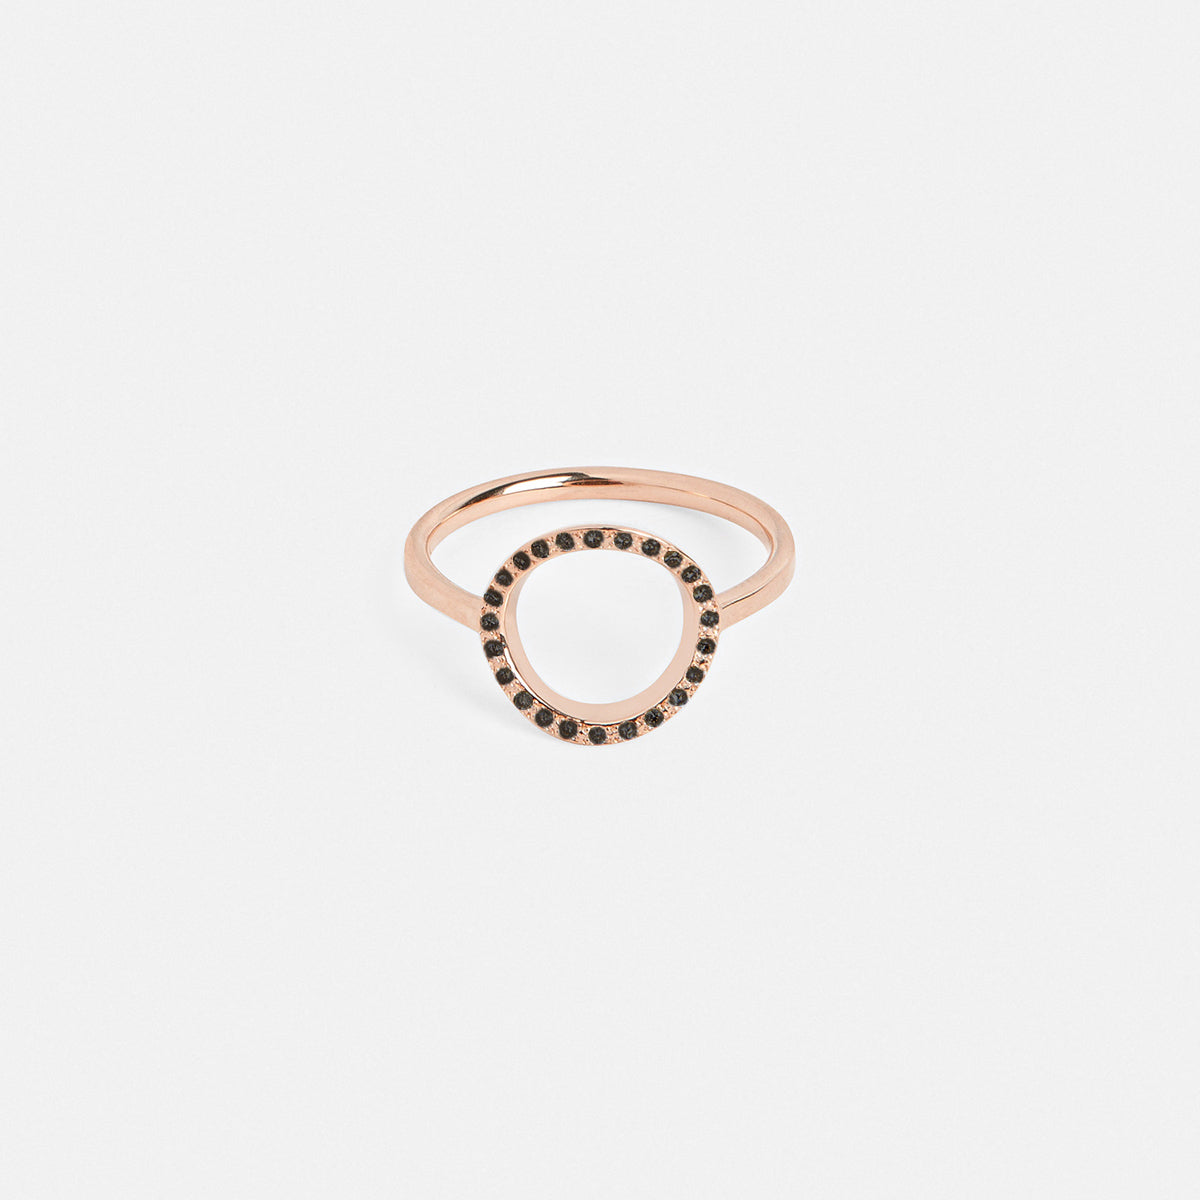 Nida Alternative Ring in 14k Rose Gold set with Black Diamonds by SHW Fine Jewelry